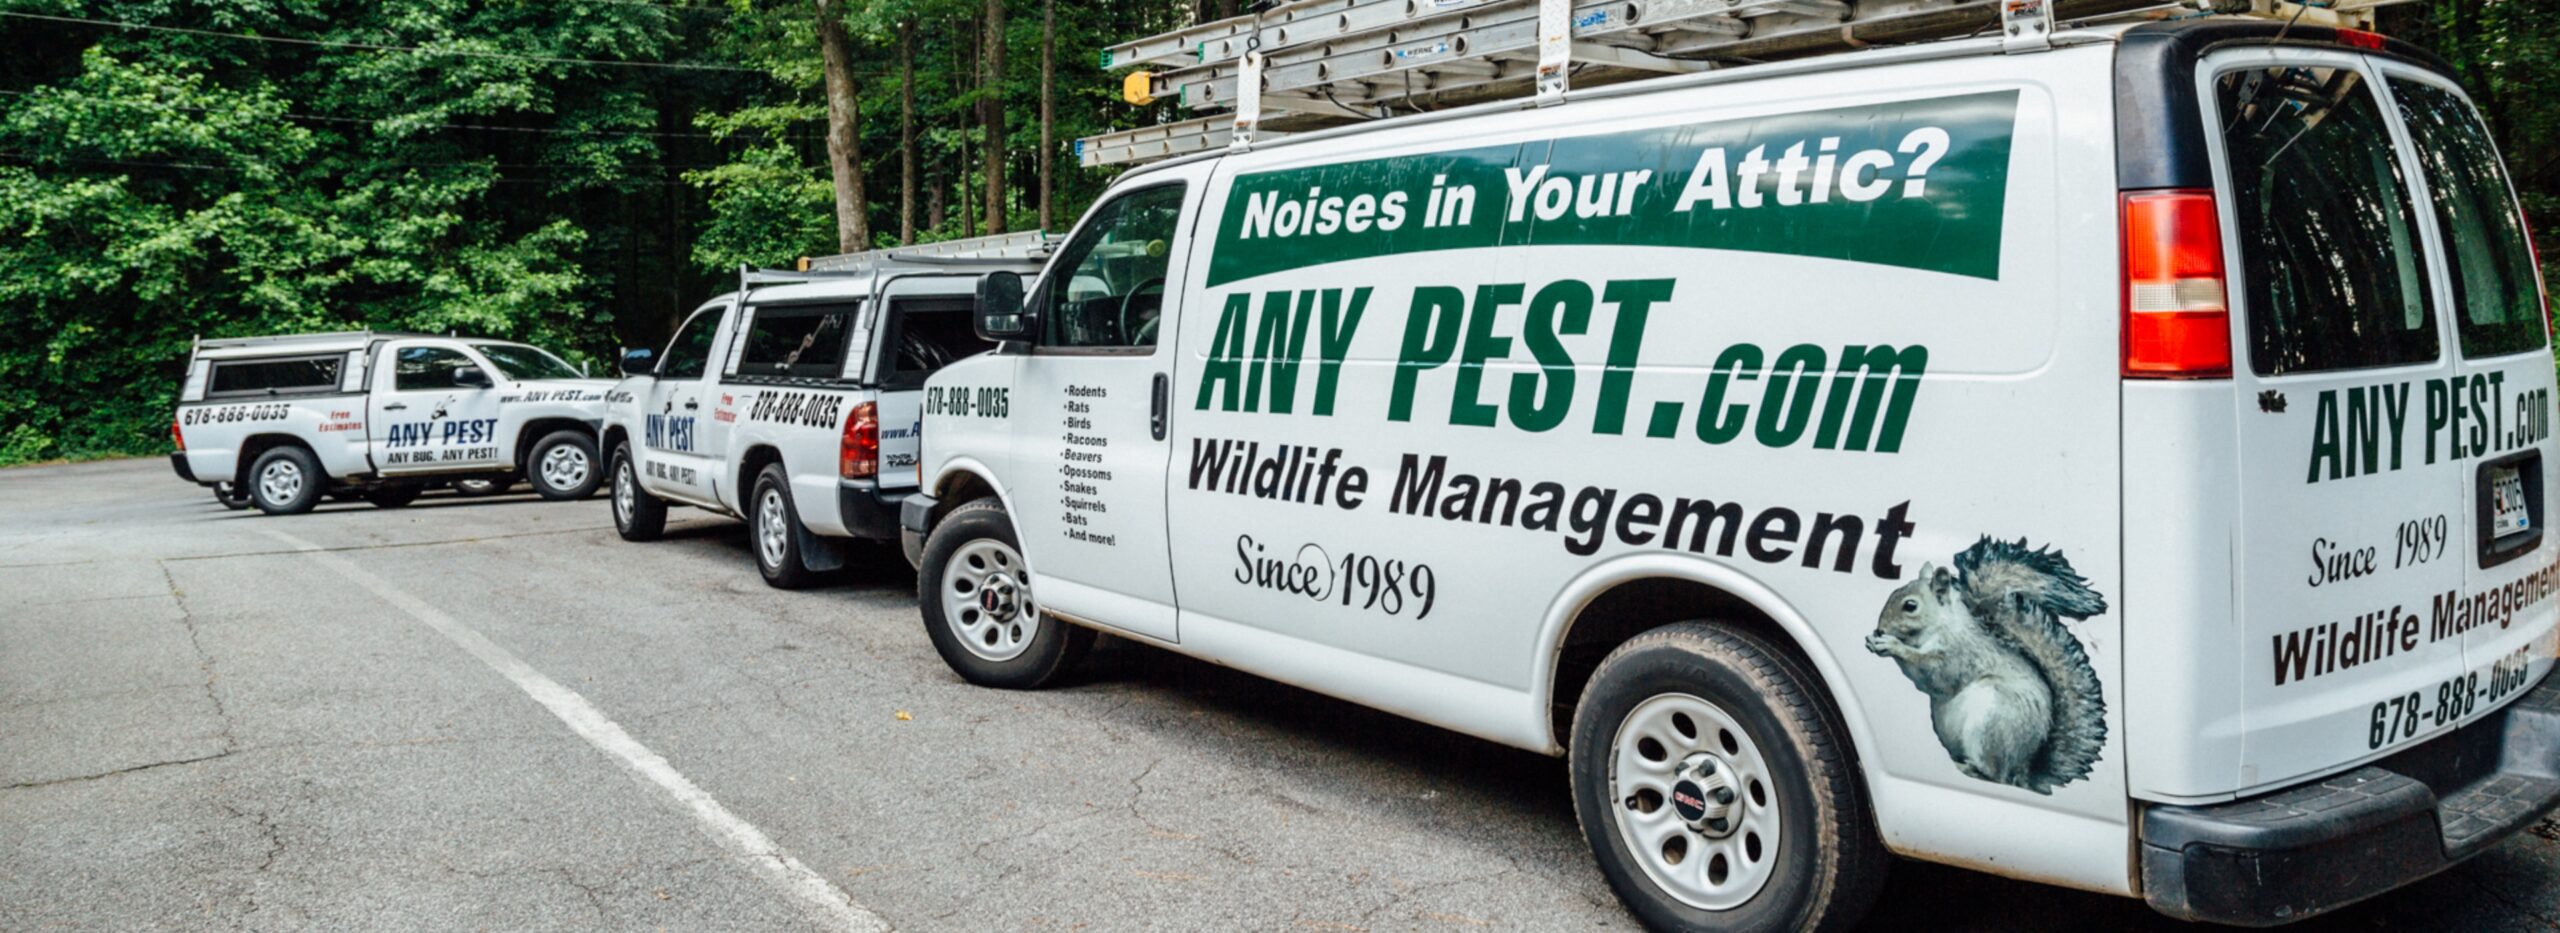 Contact us | Any Pest Inc